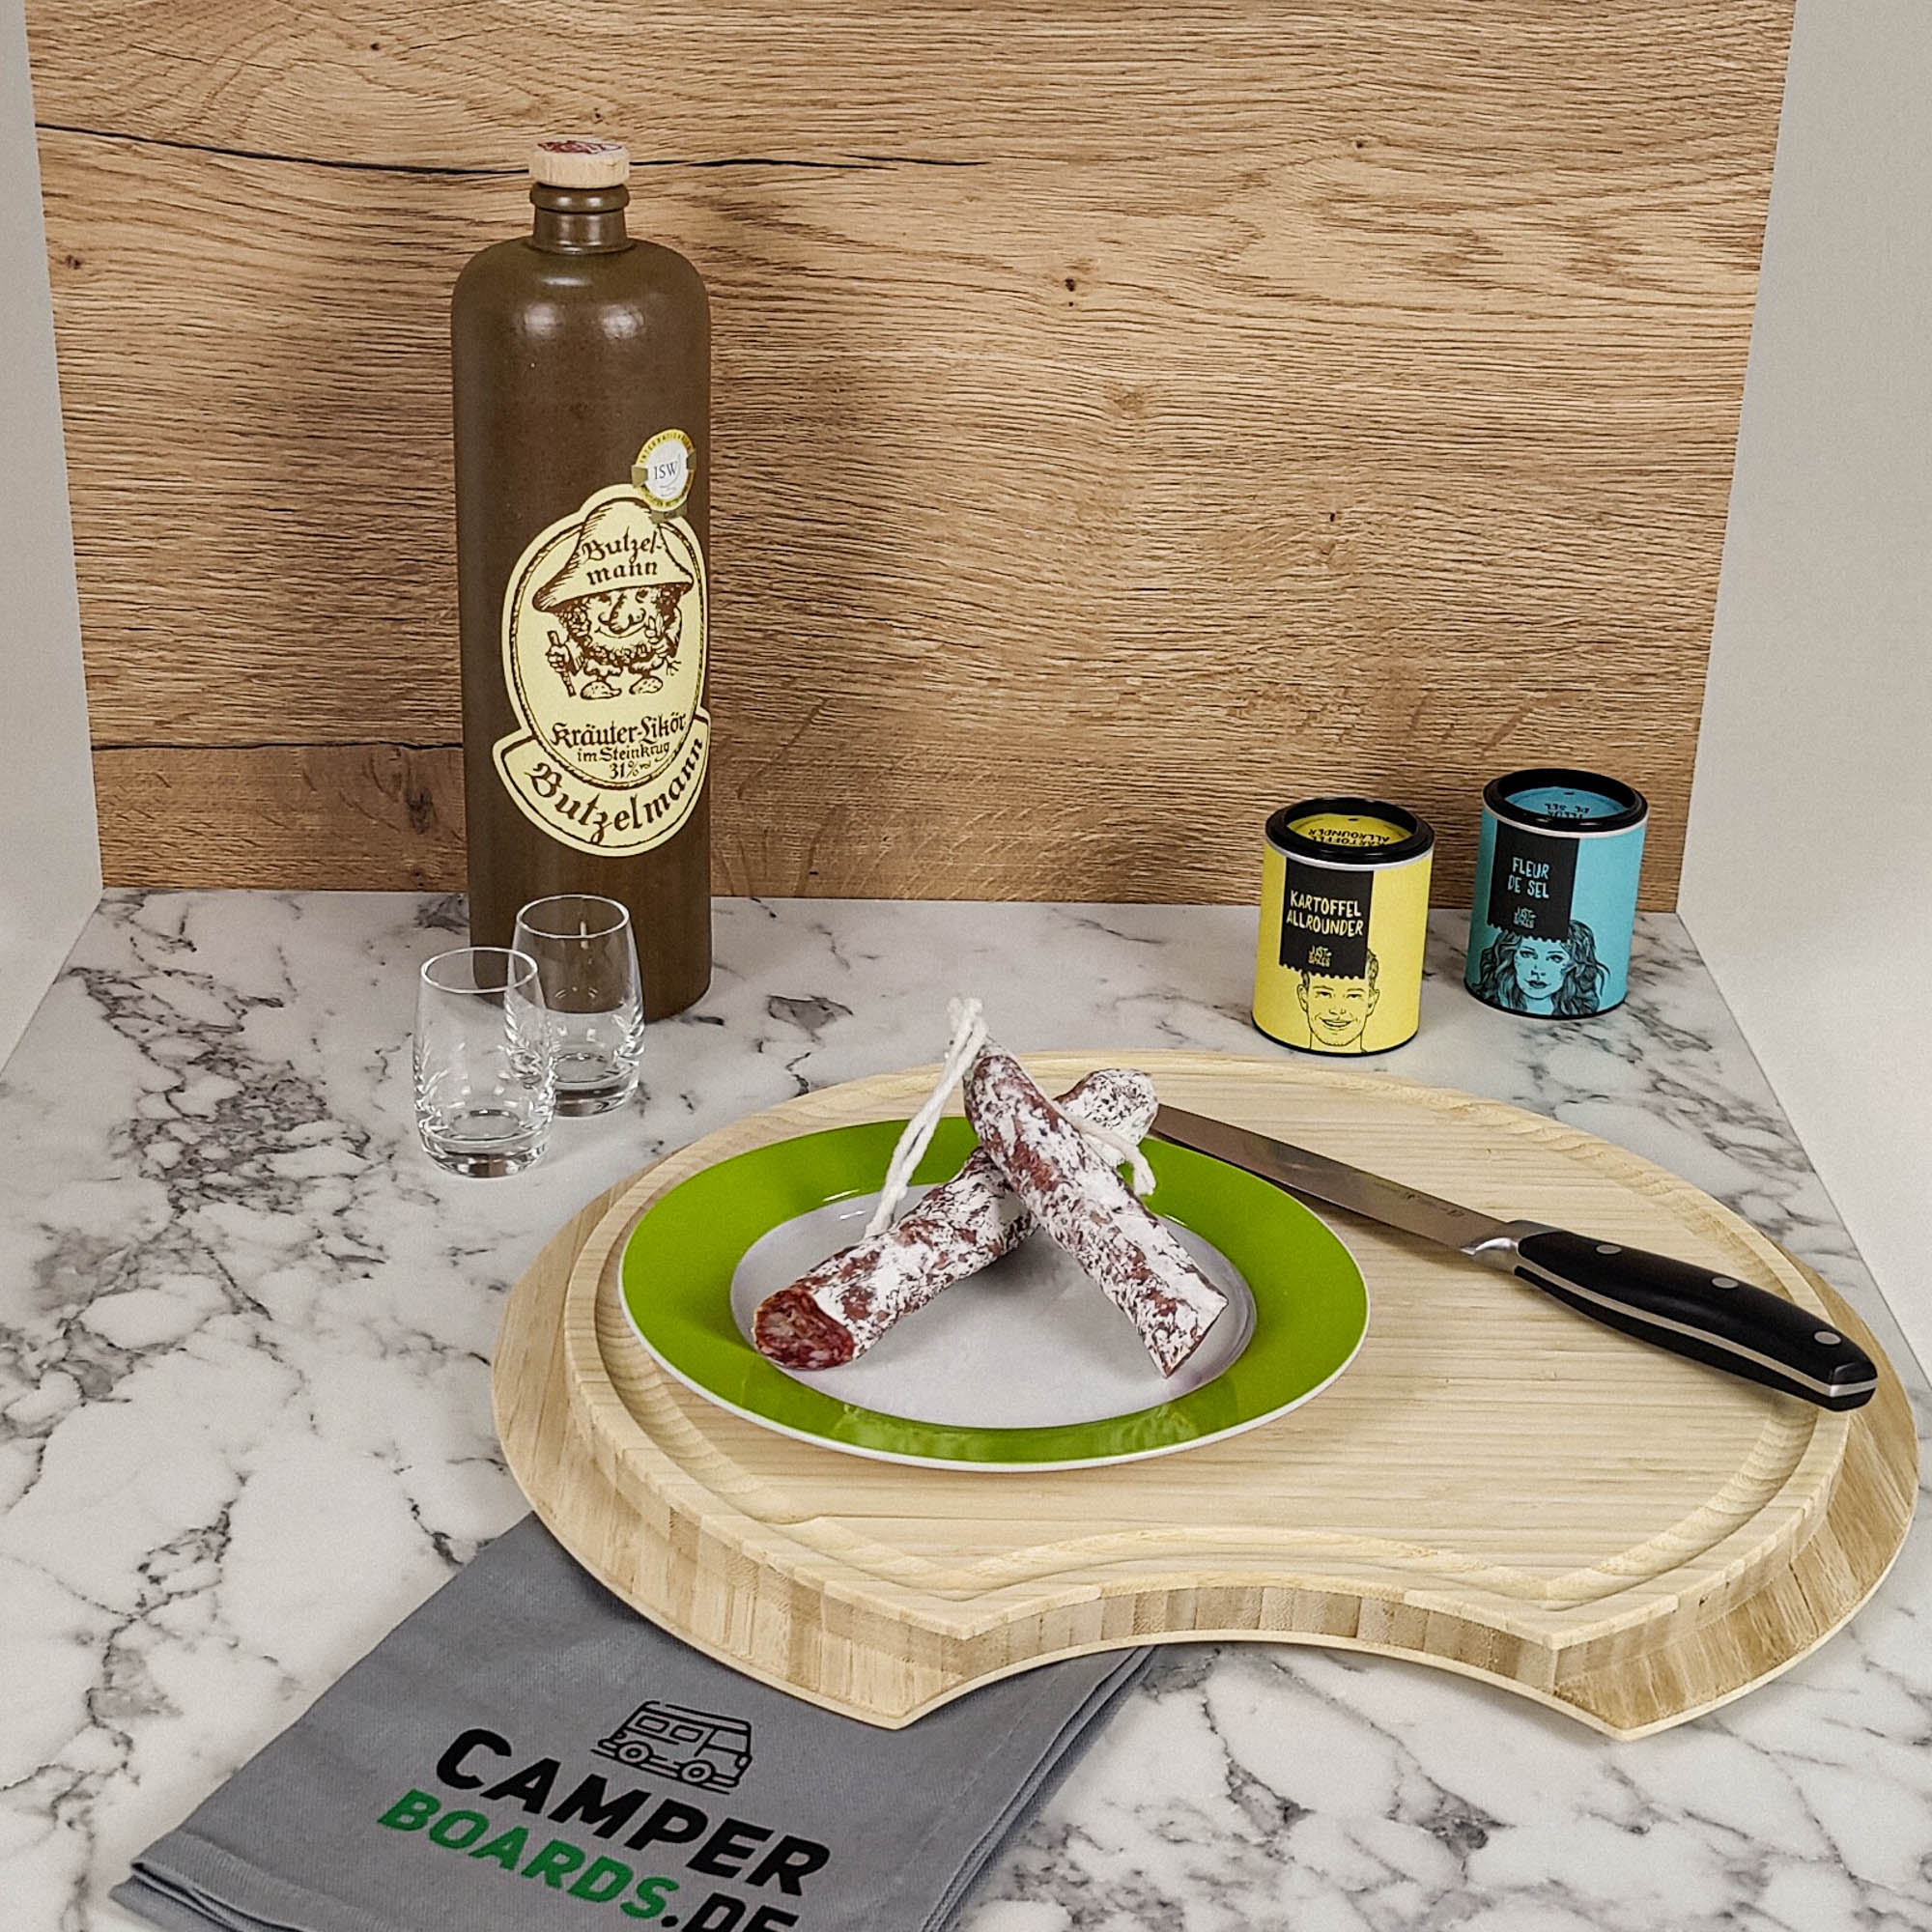 Cutting board with sink cover for Miller models